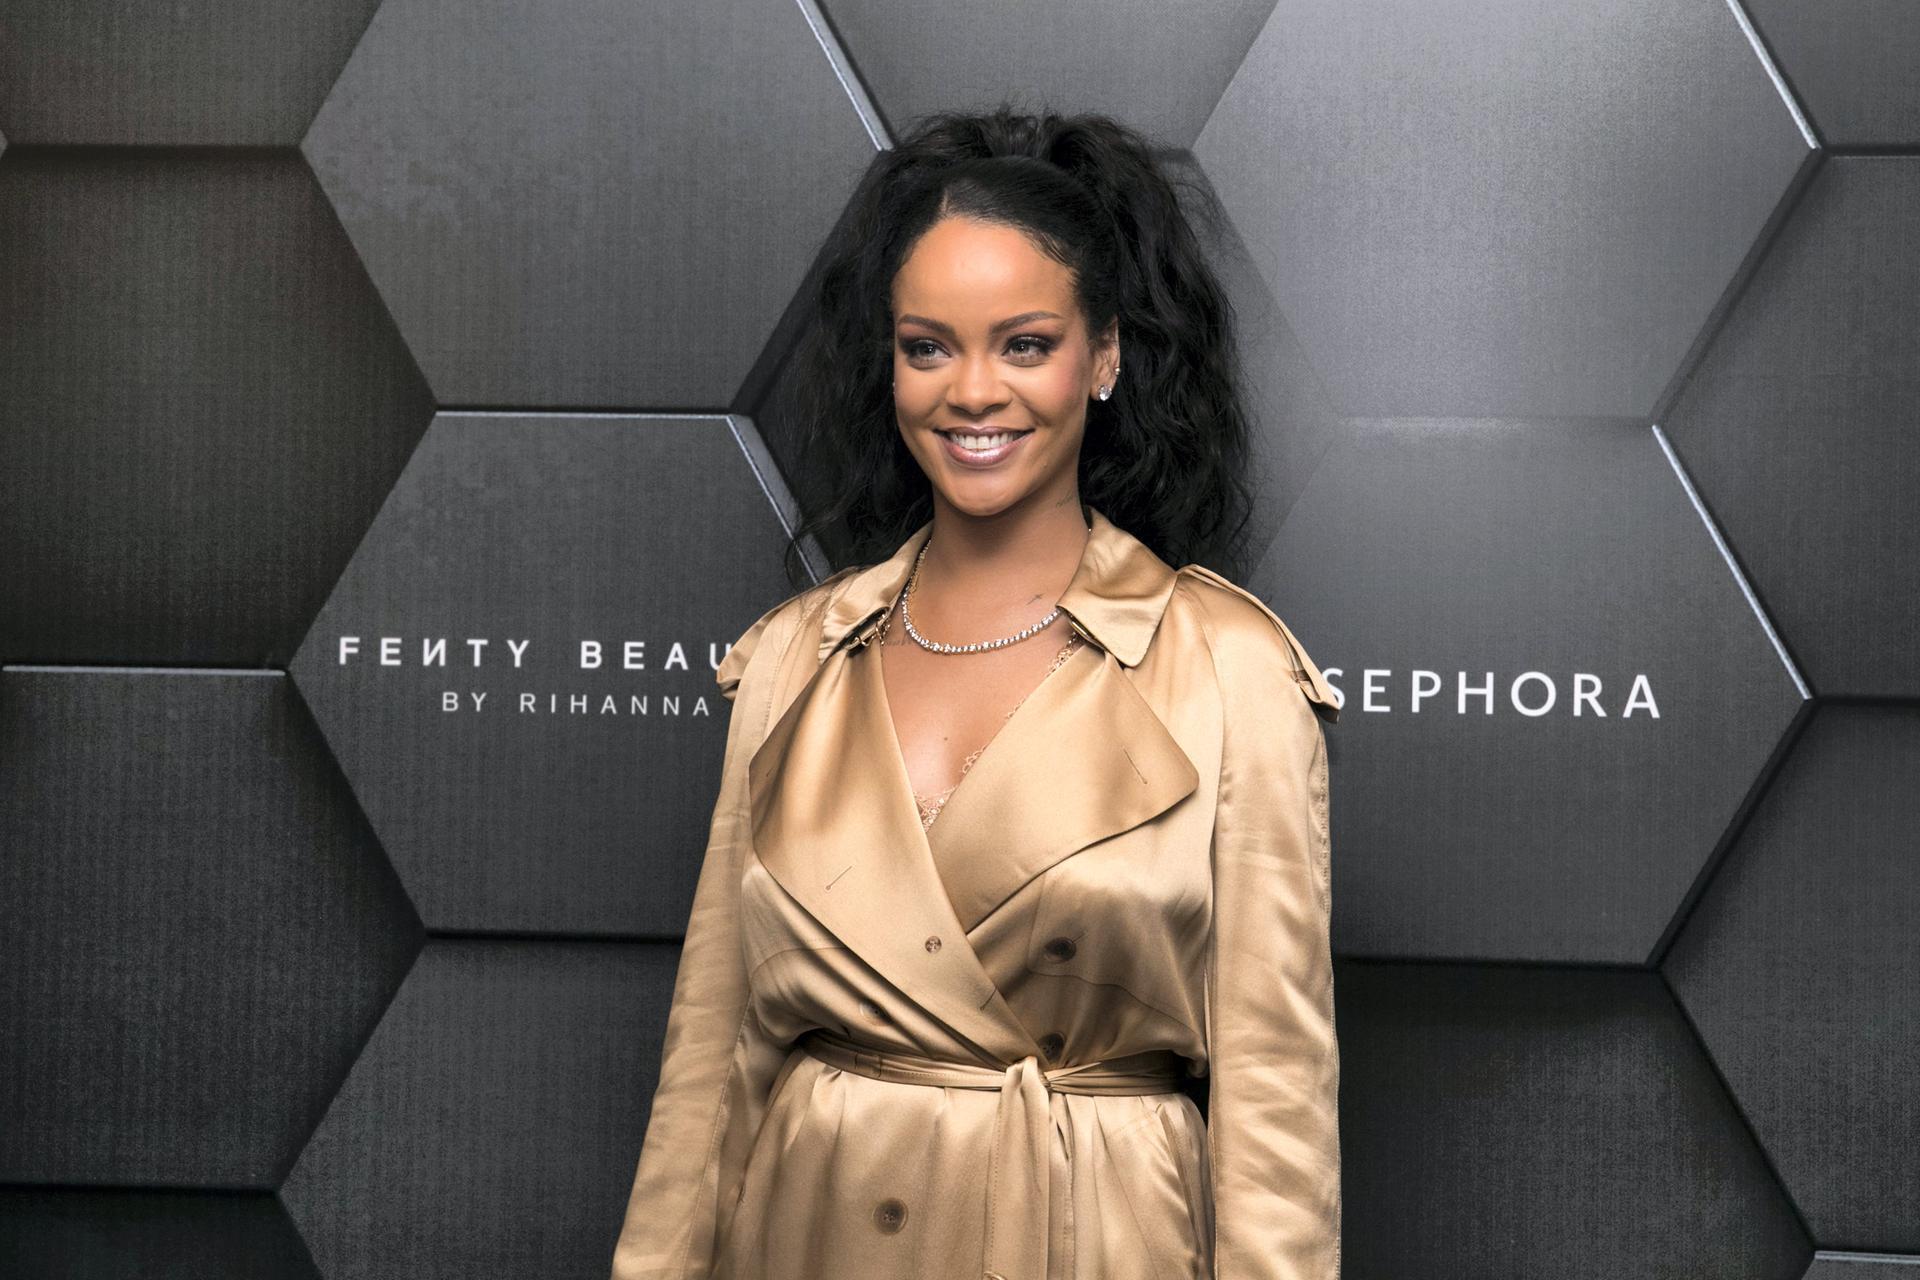 Rihanna's Fenty Beauty Launch Offered a Much-Needed Dose of